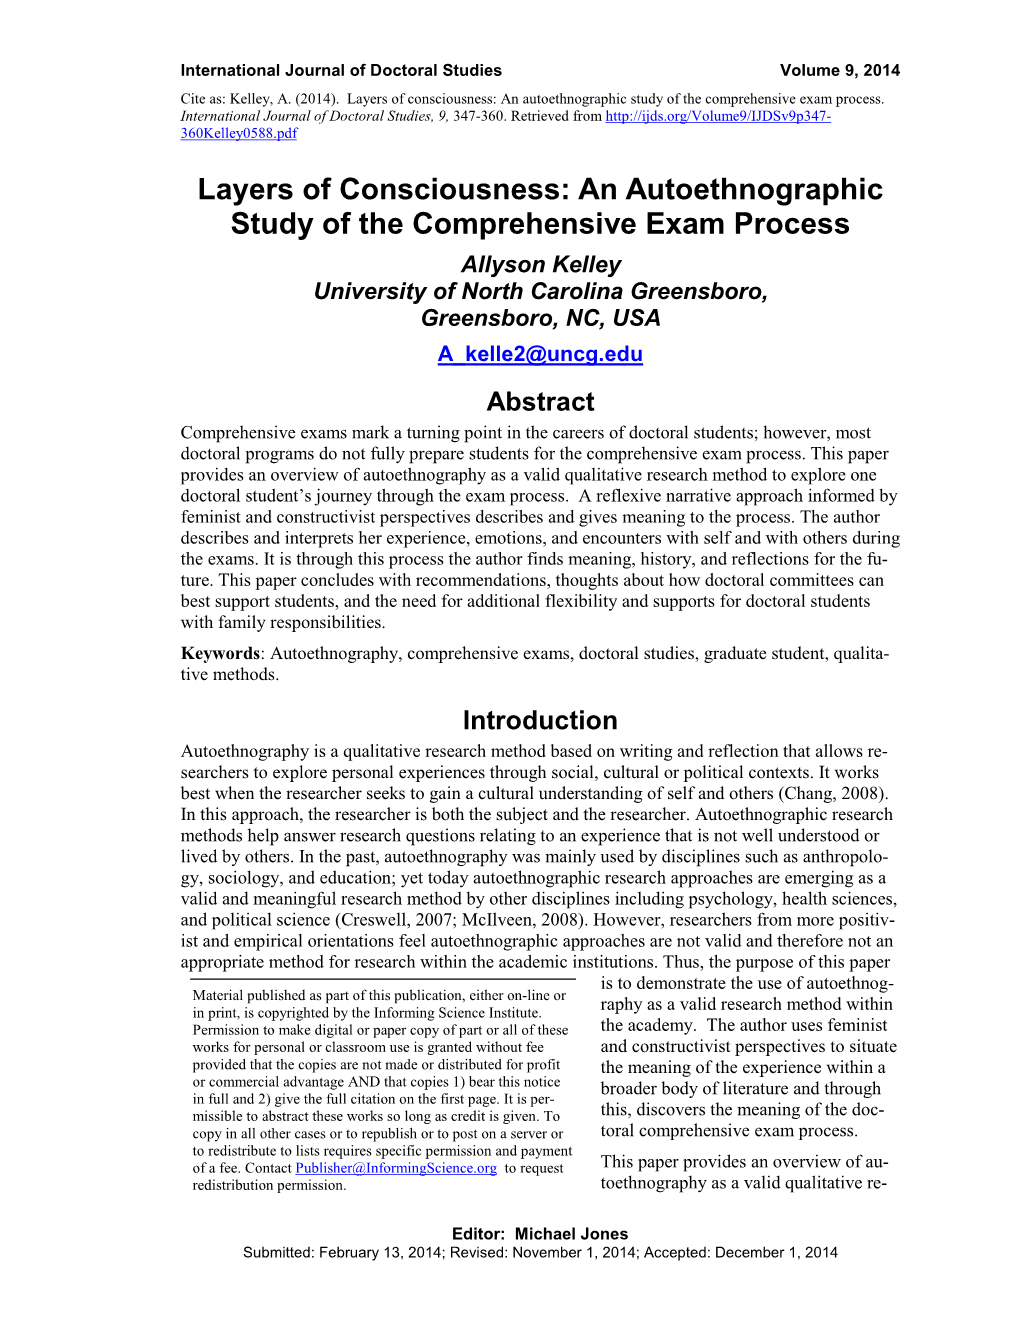 An Autoethnographic Study of the Comprehensive Exam Process